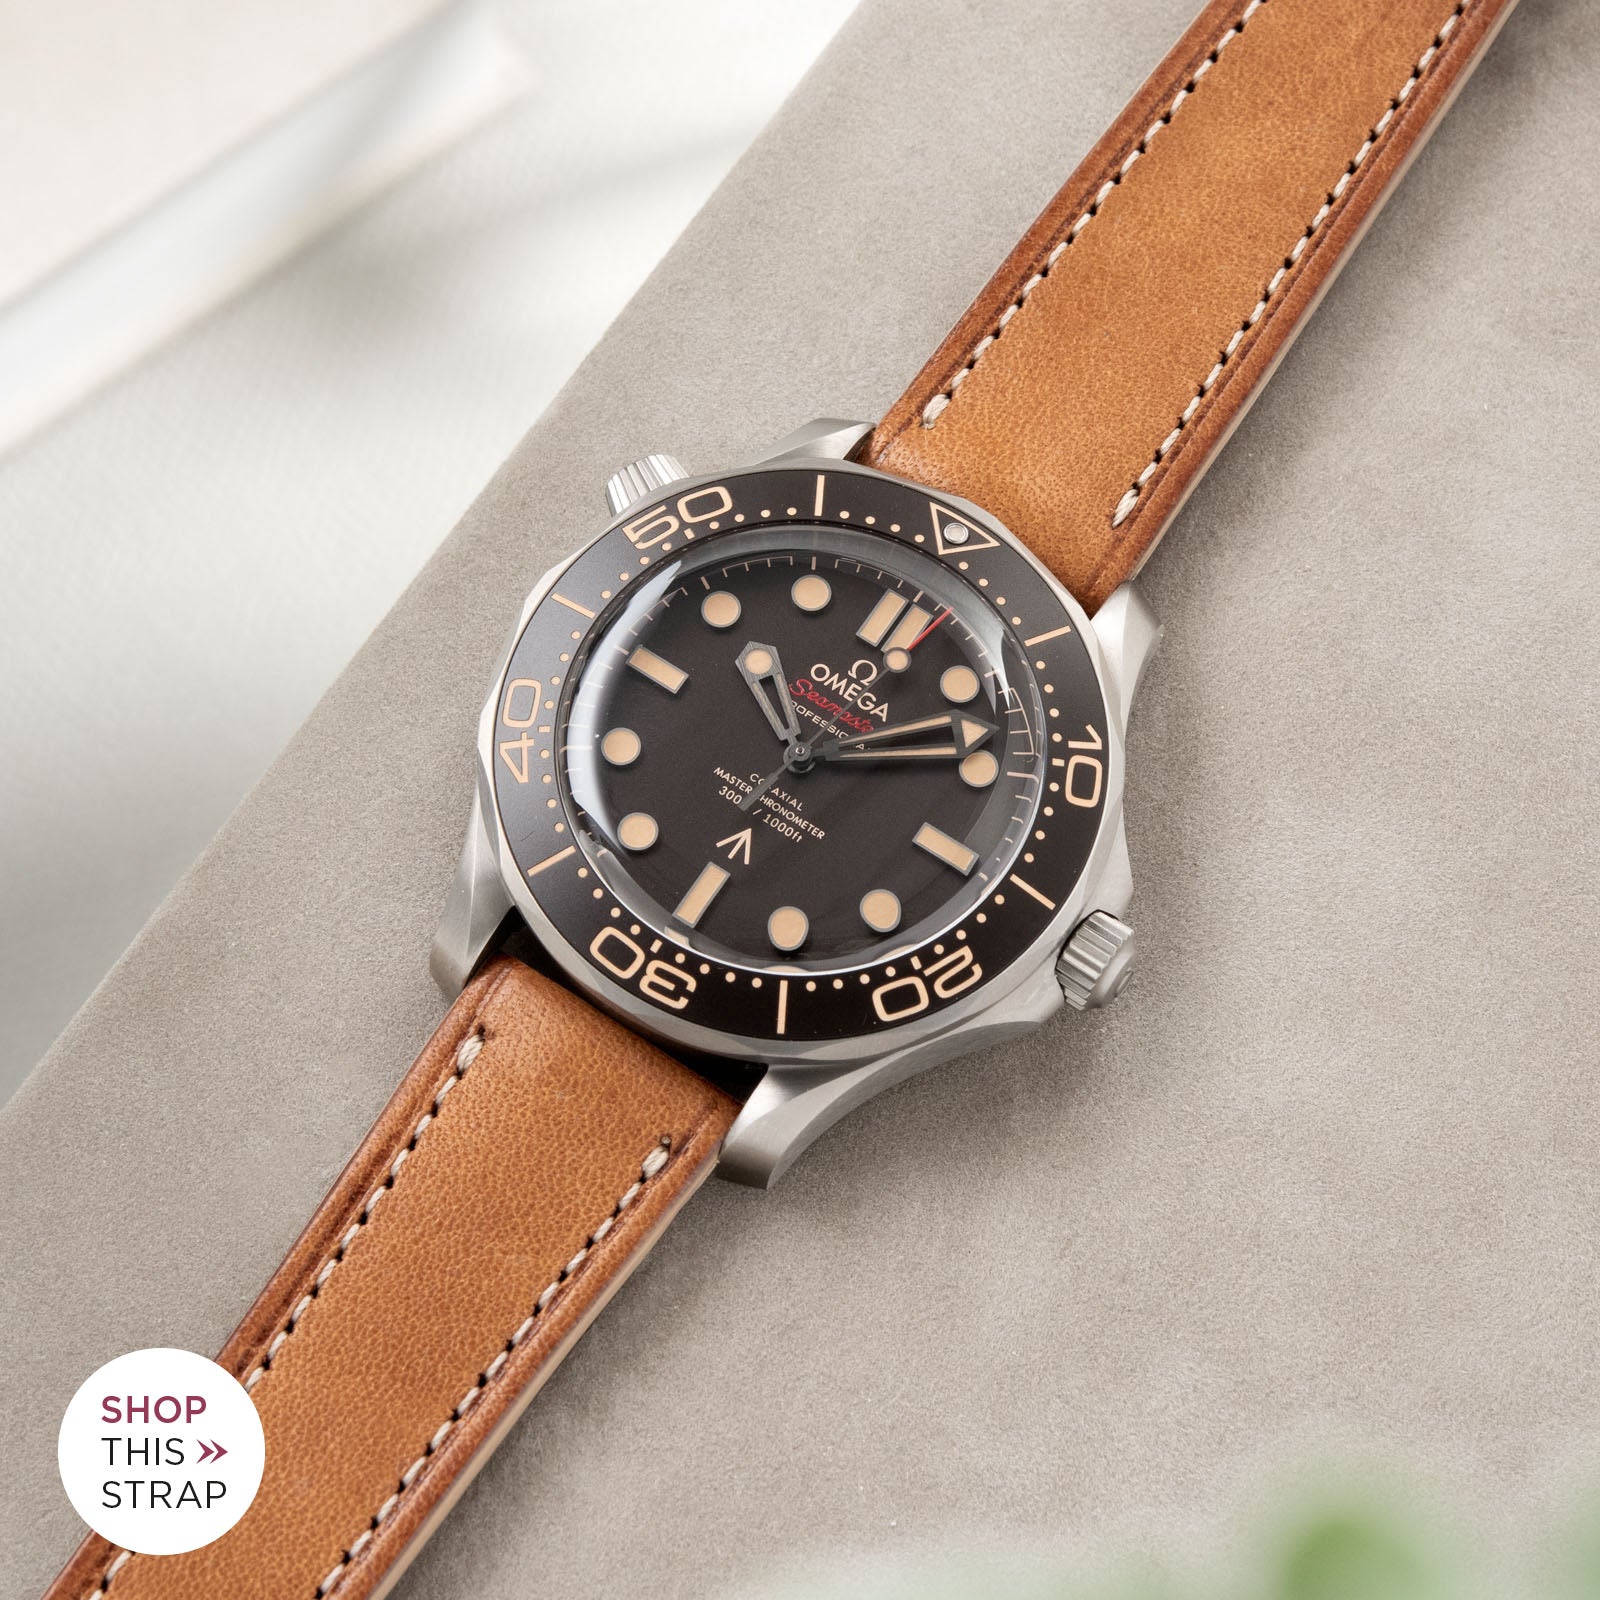 Bulang and Sons_Strap Guide_The Omega Seamaster James Bond_Corsaro Brown Retro Leather Watch Strap